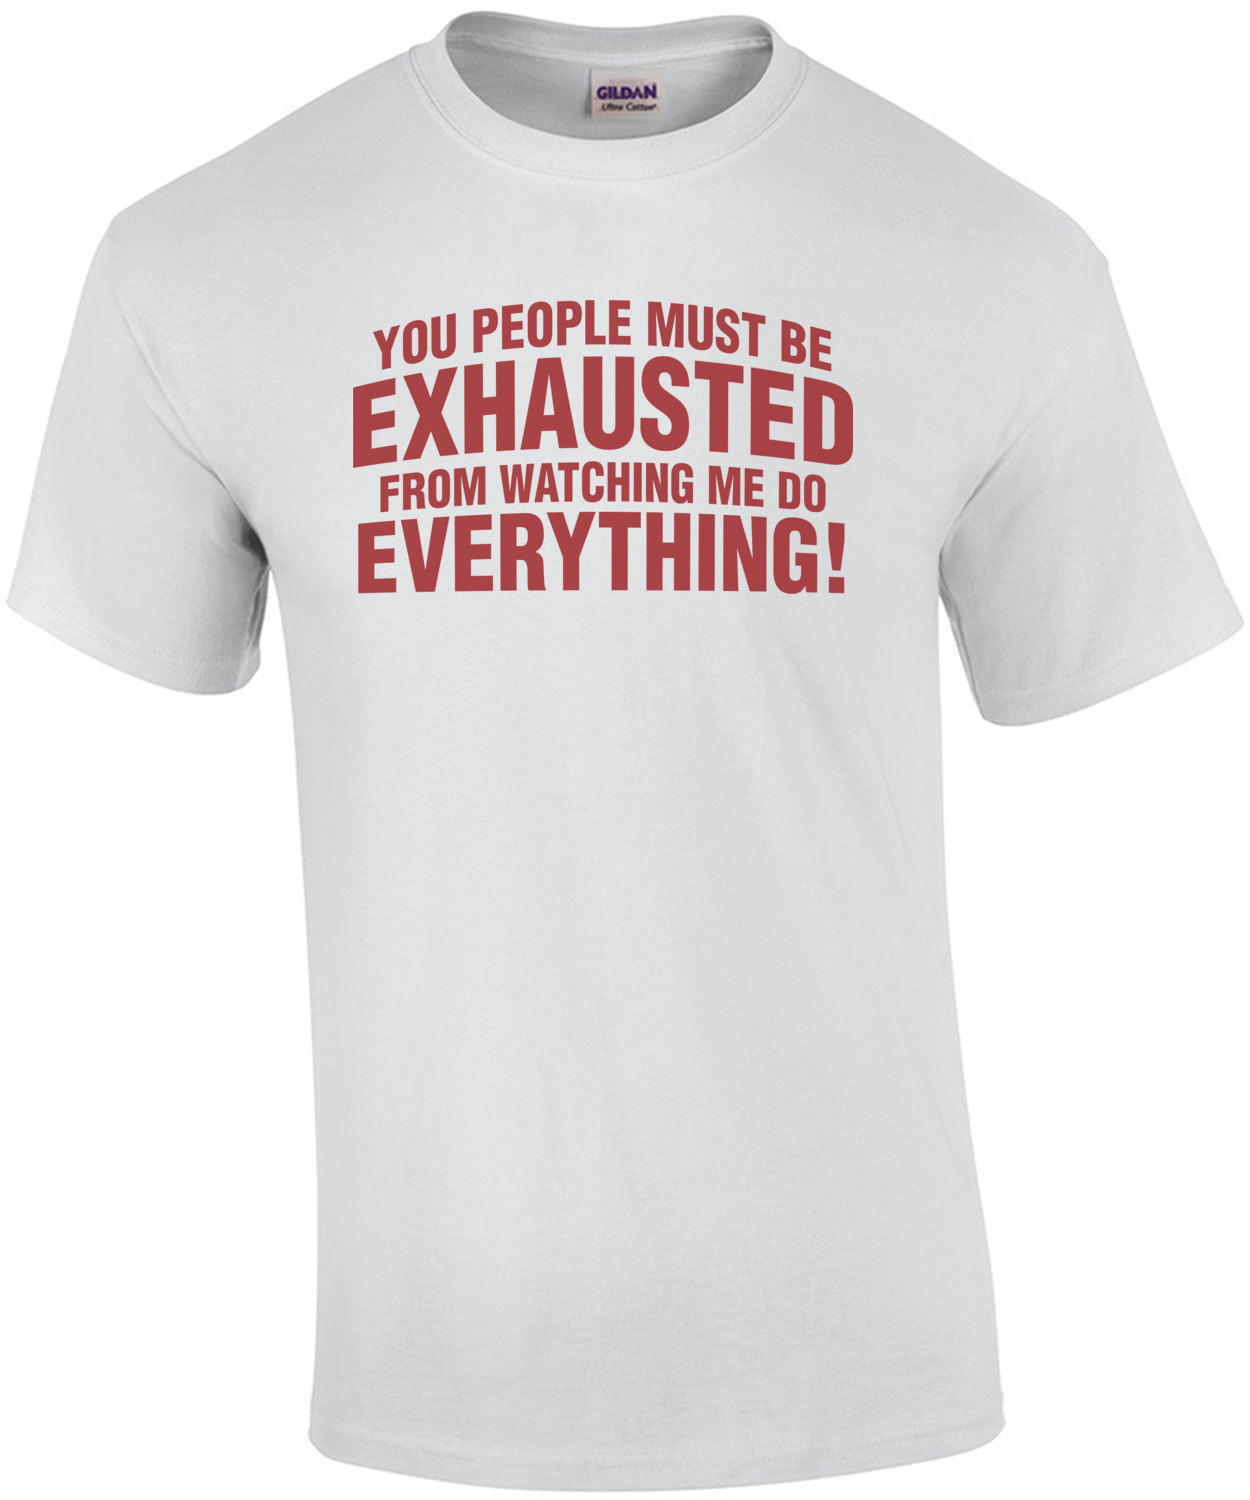 You People Must Be Exhausted From Watching Me Do Everything Shirt